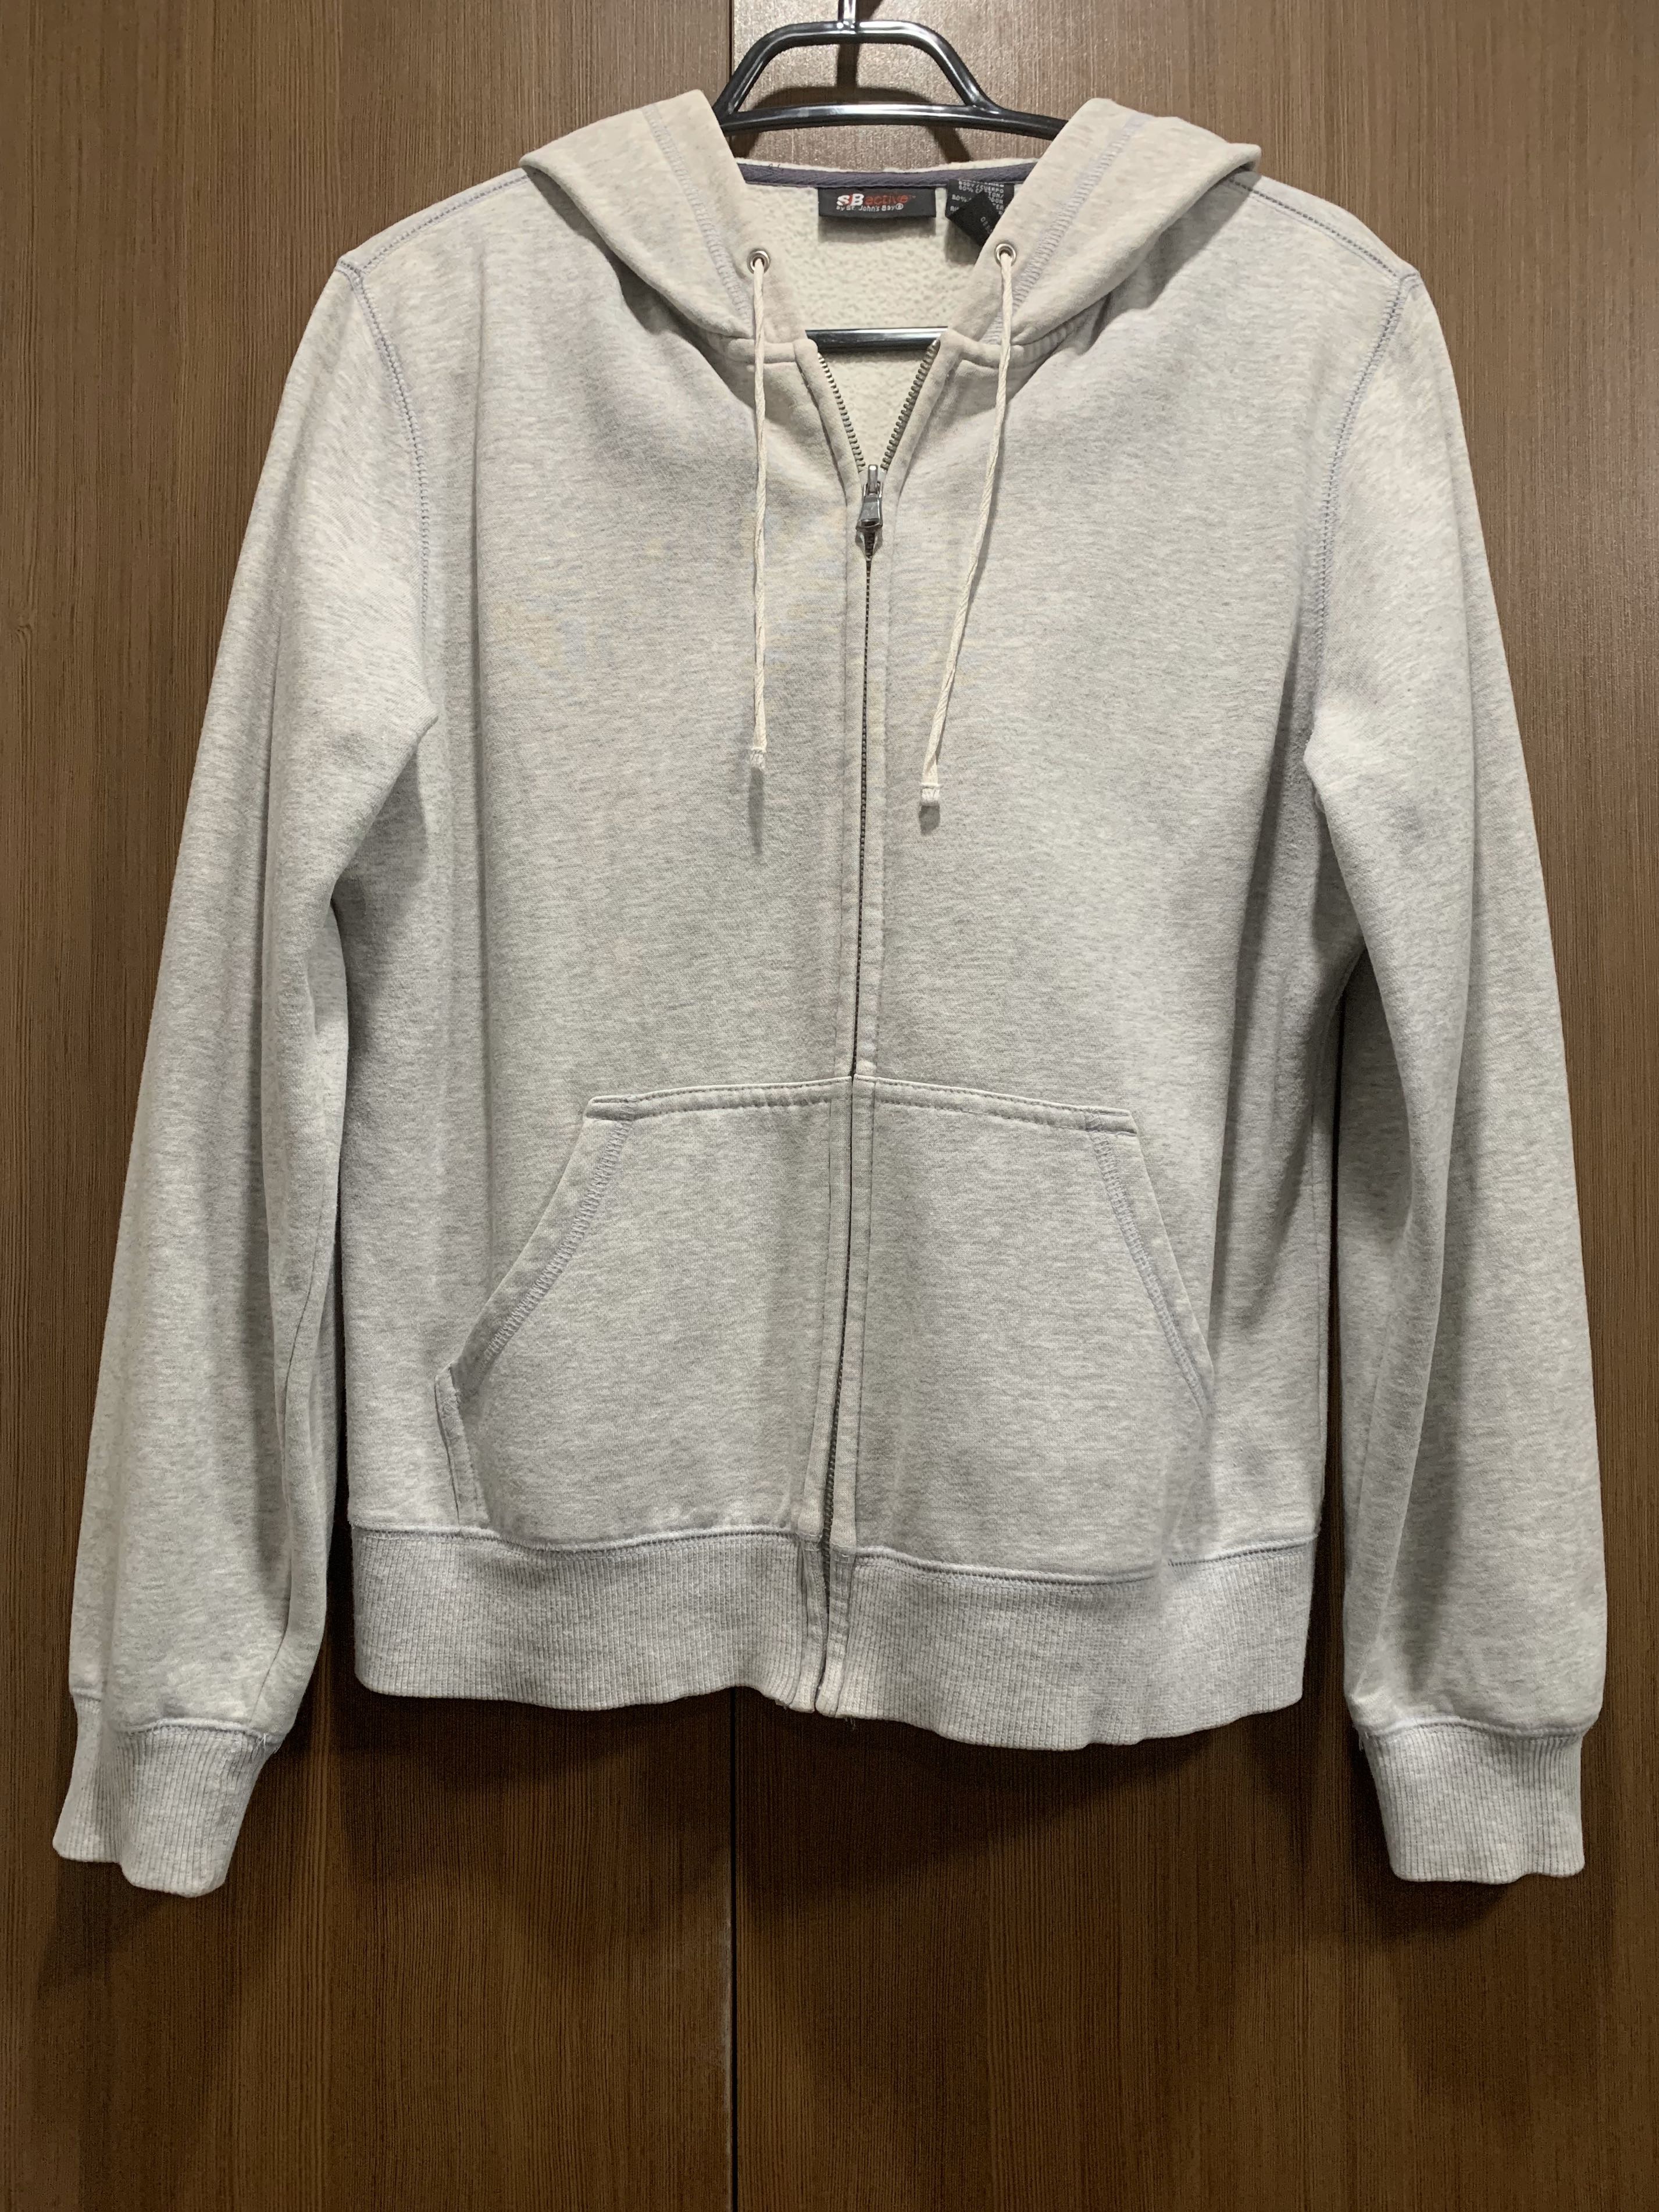 Grey Jacket with Hoodie, Women's Fashion, Coats, Jackets and Outerwear ...